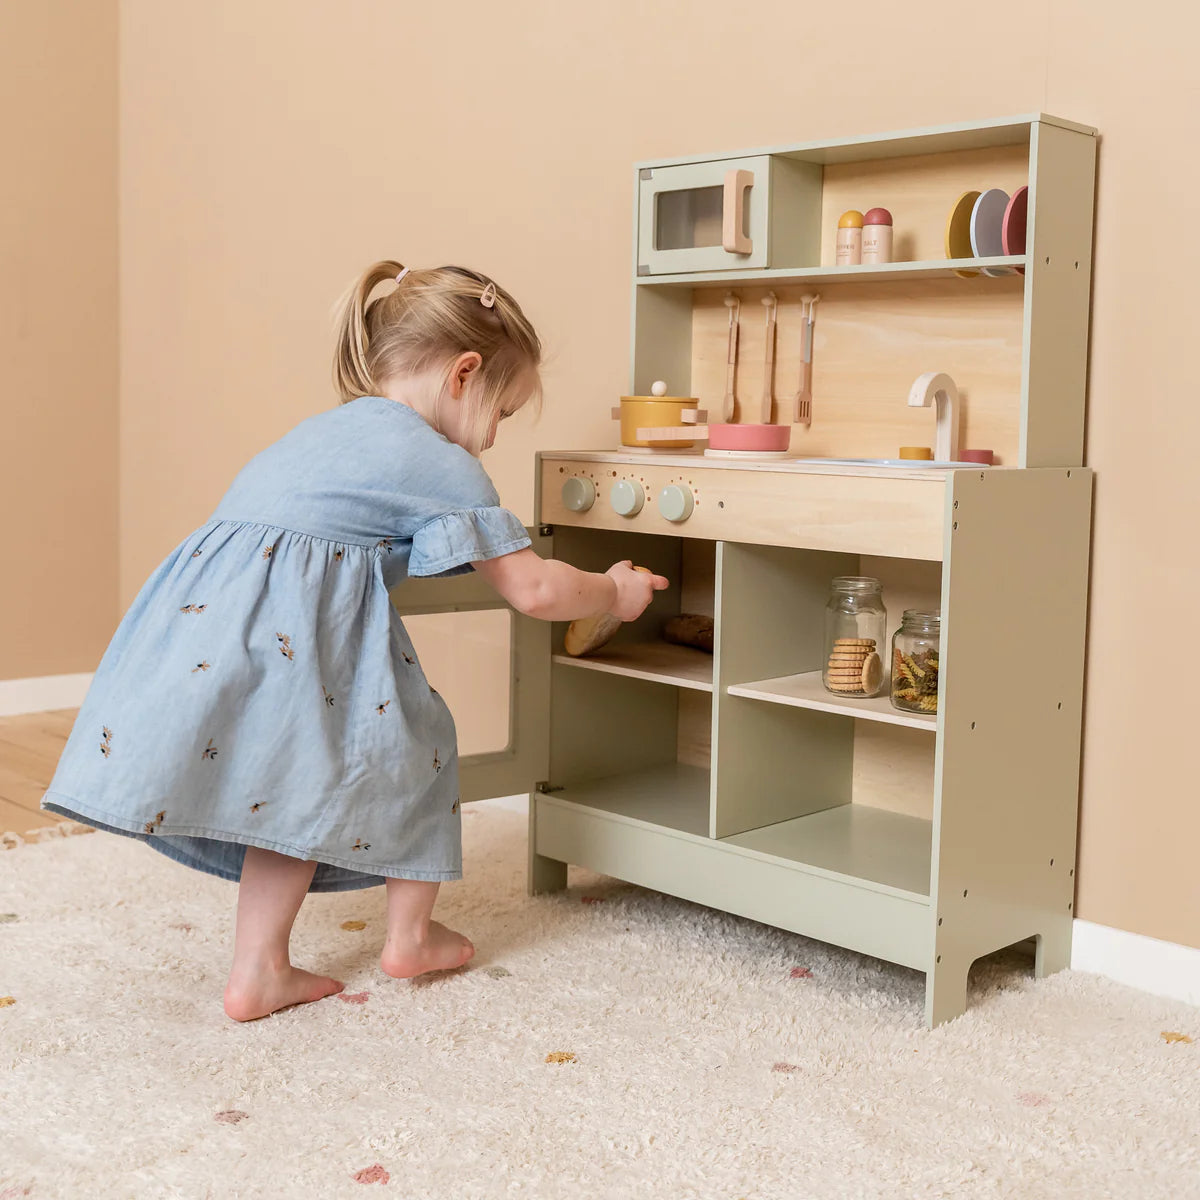 The Little Dutch Play Kitchen has an opening oven door which is also handy for storing play food in when not in use